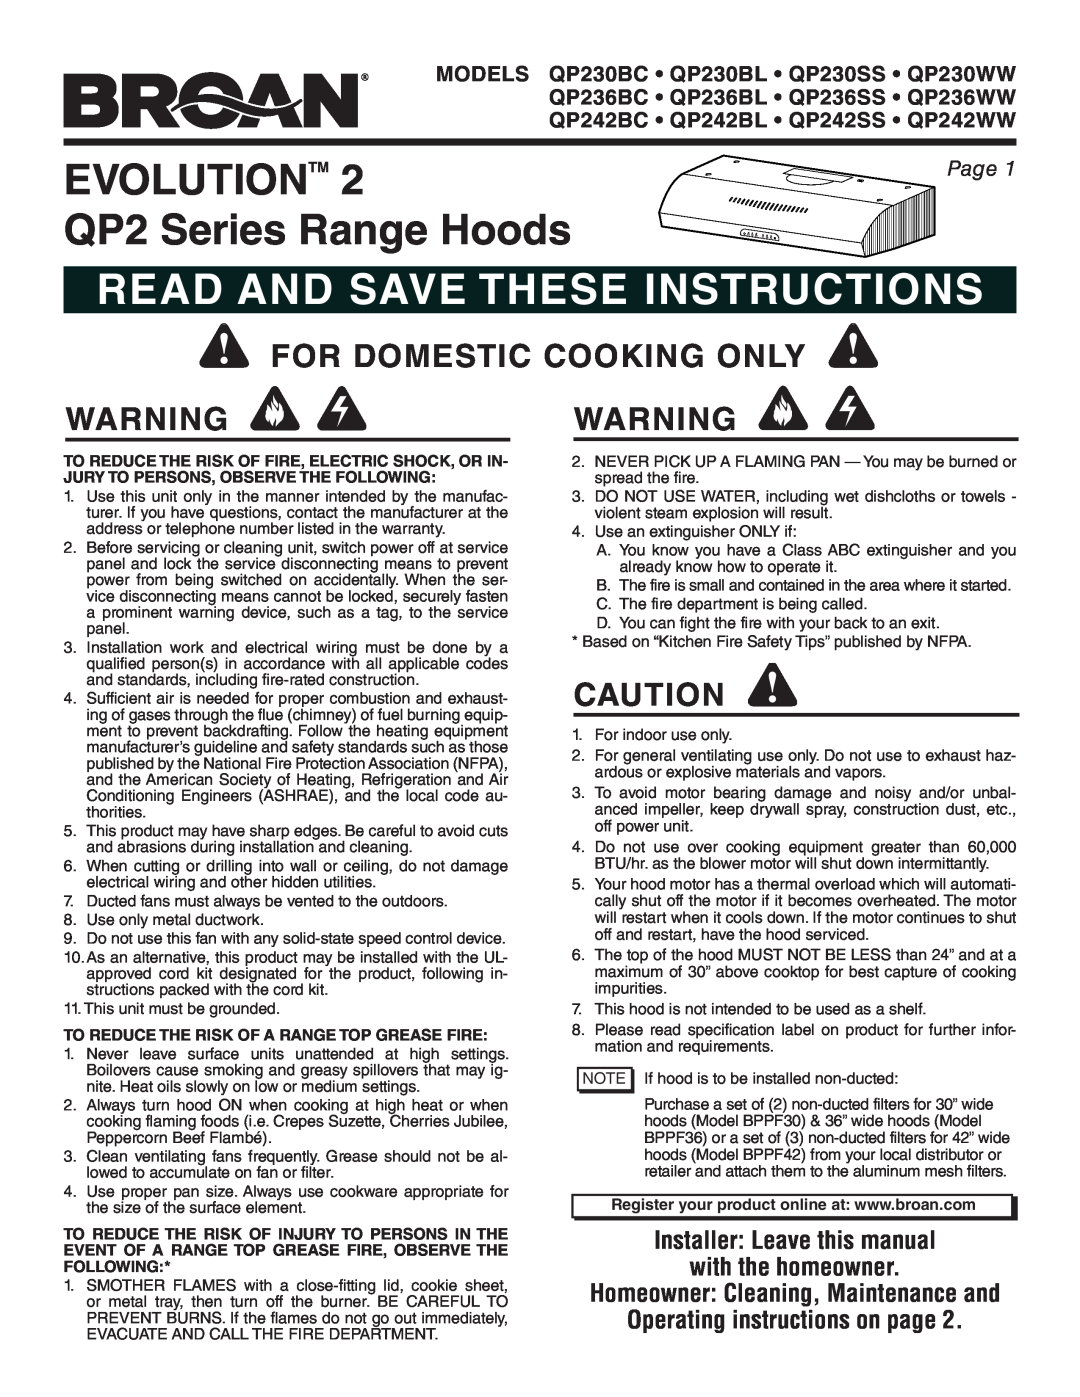 Broan QP242BL warranty Evolution, QP2 Series Range Hoods, Read And Save These Instructions, For Domestic Cooking Only 